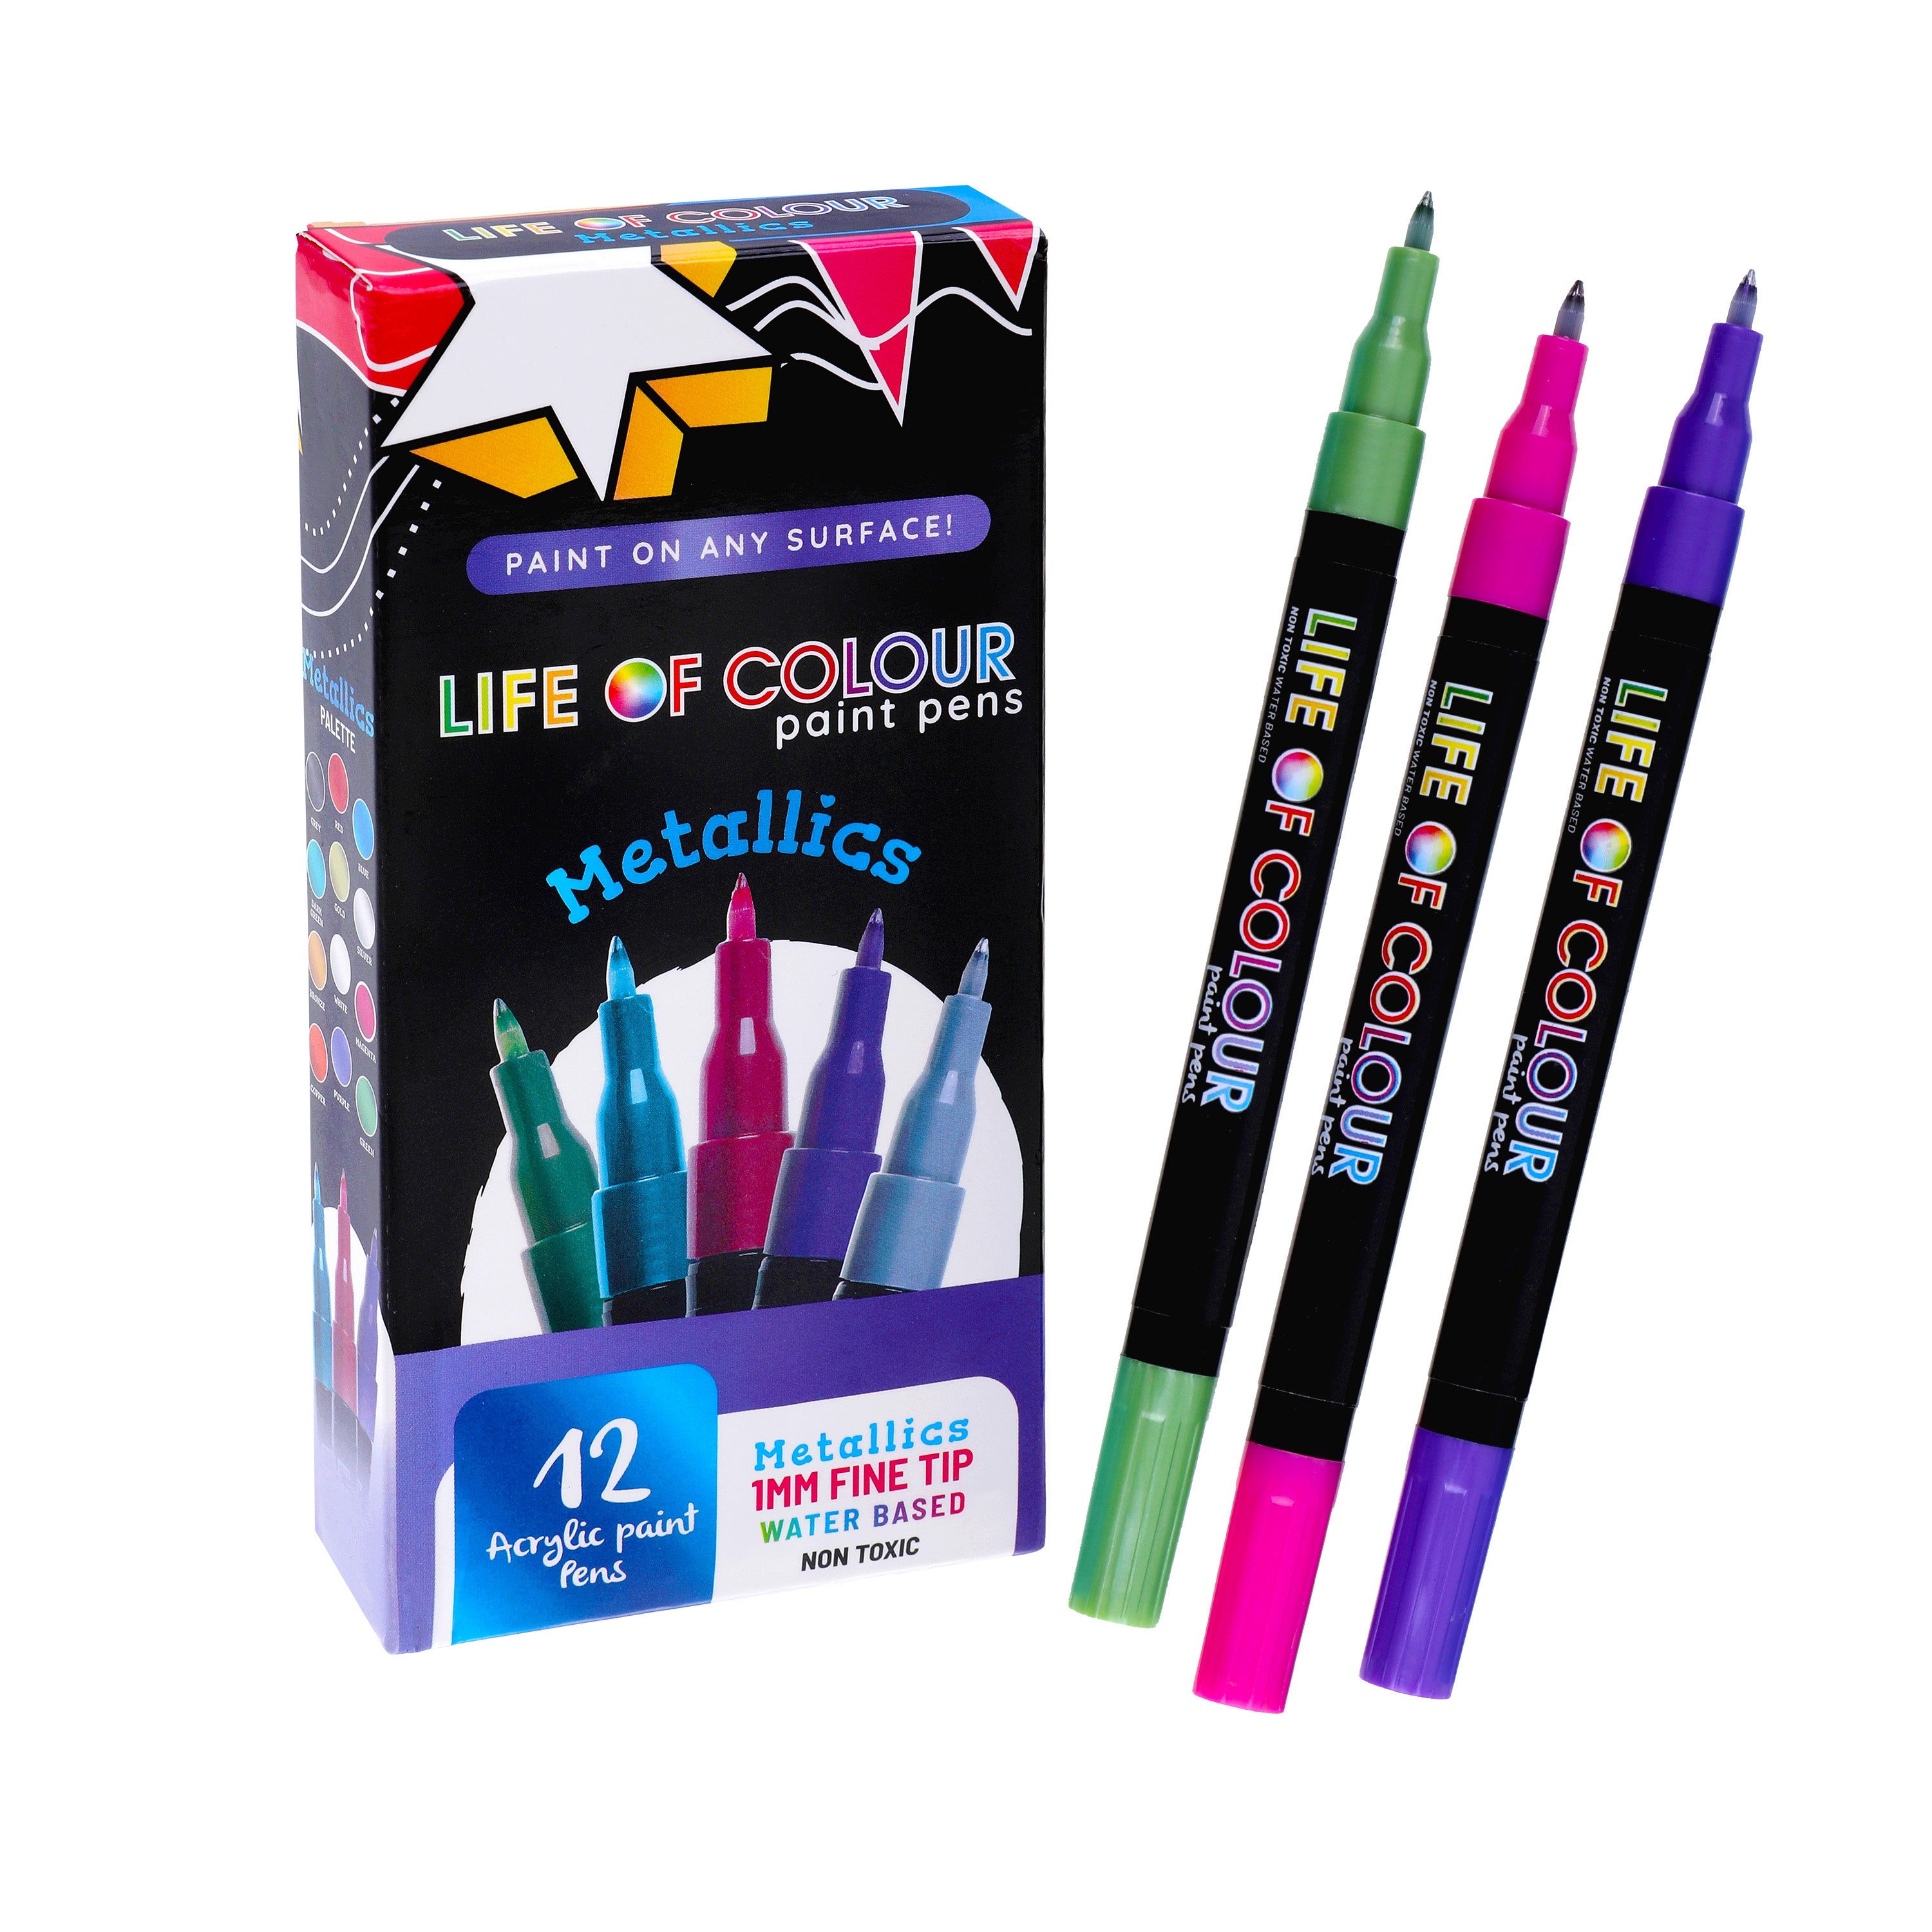 42 Markers for Art 30 Acrylic Extra Fine Tip Paint Pens 12 Gold & Silver  Paint Pens for Rocks, Wood, Glass, Ceramic, Metal Painting 